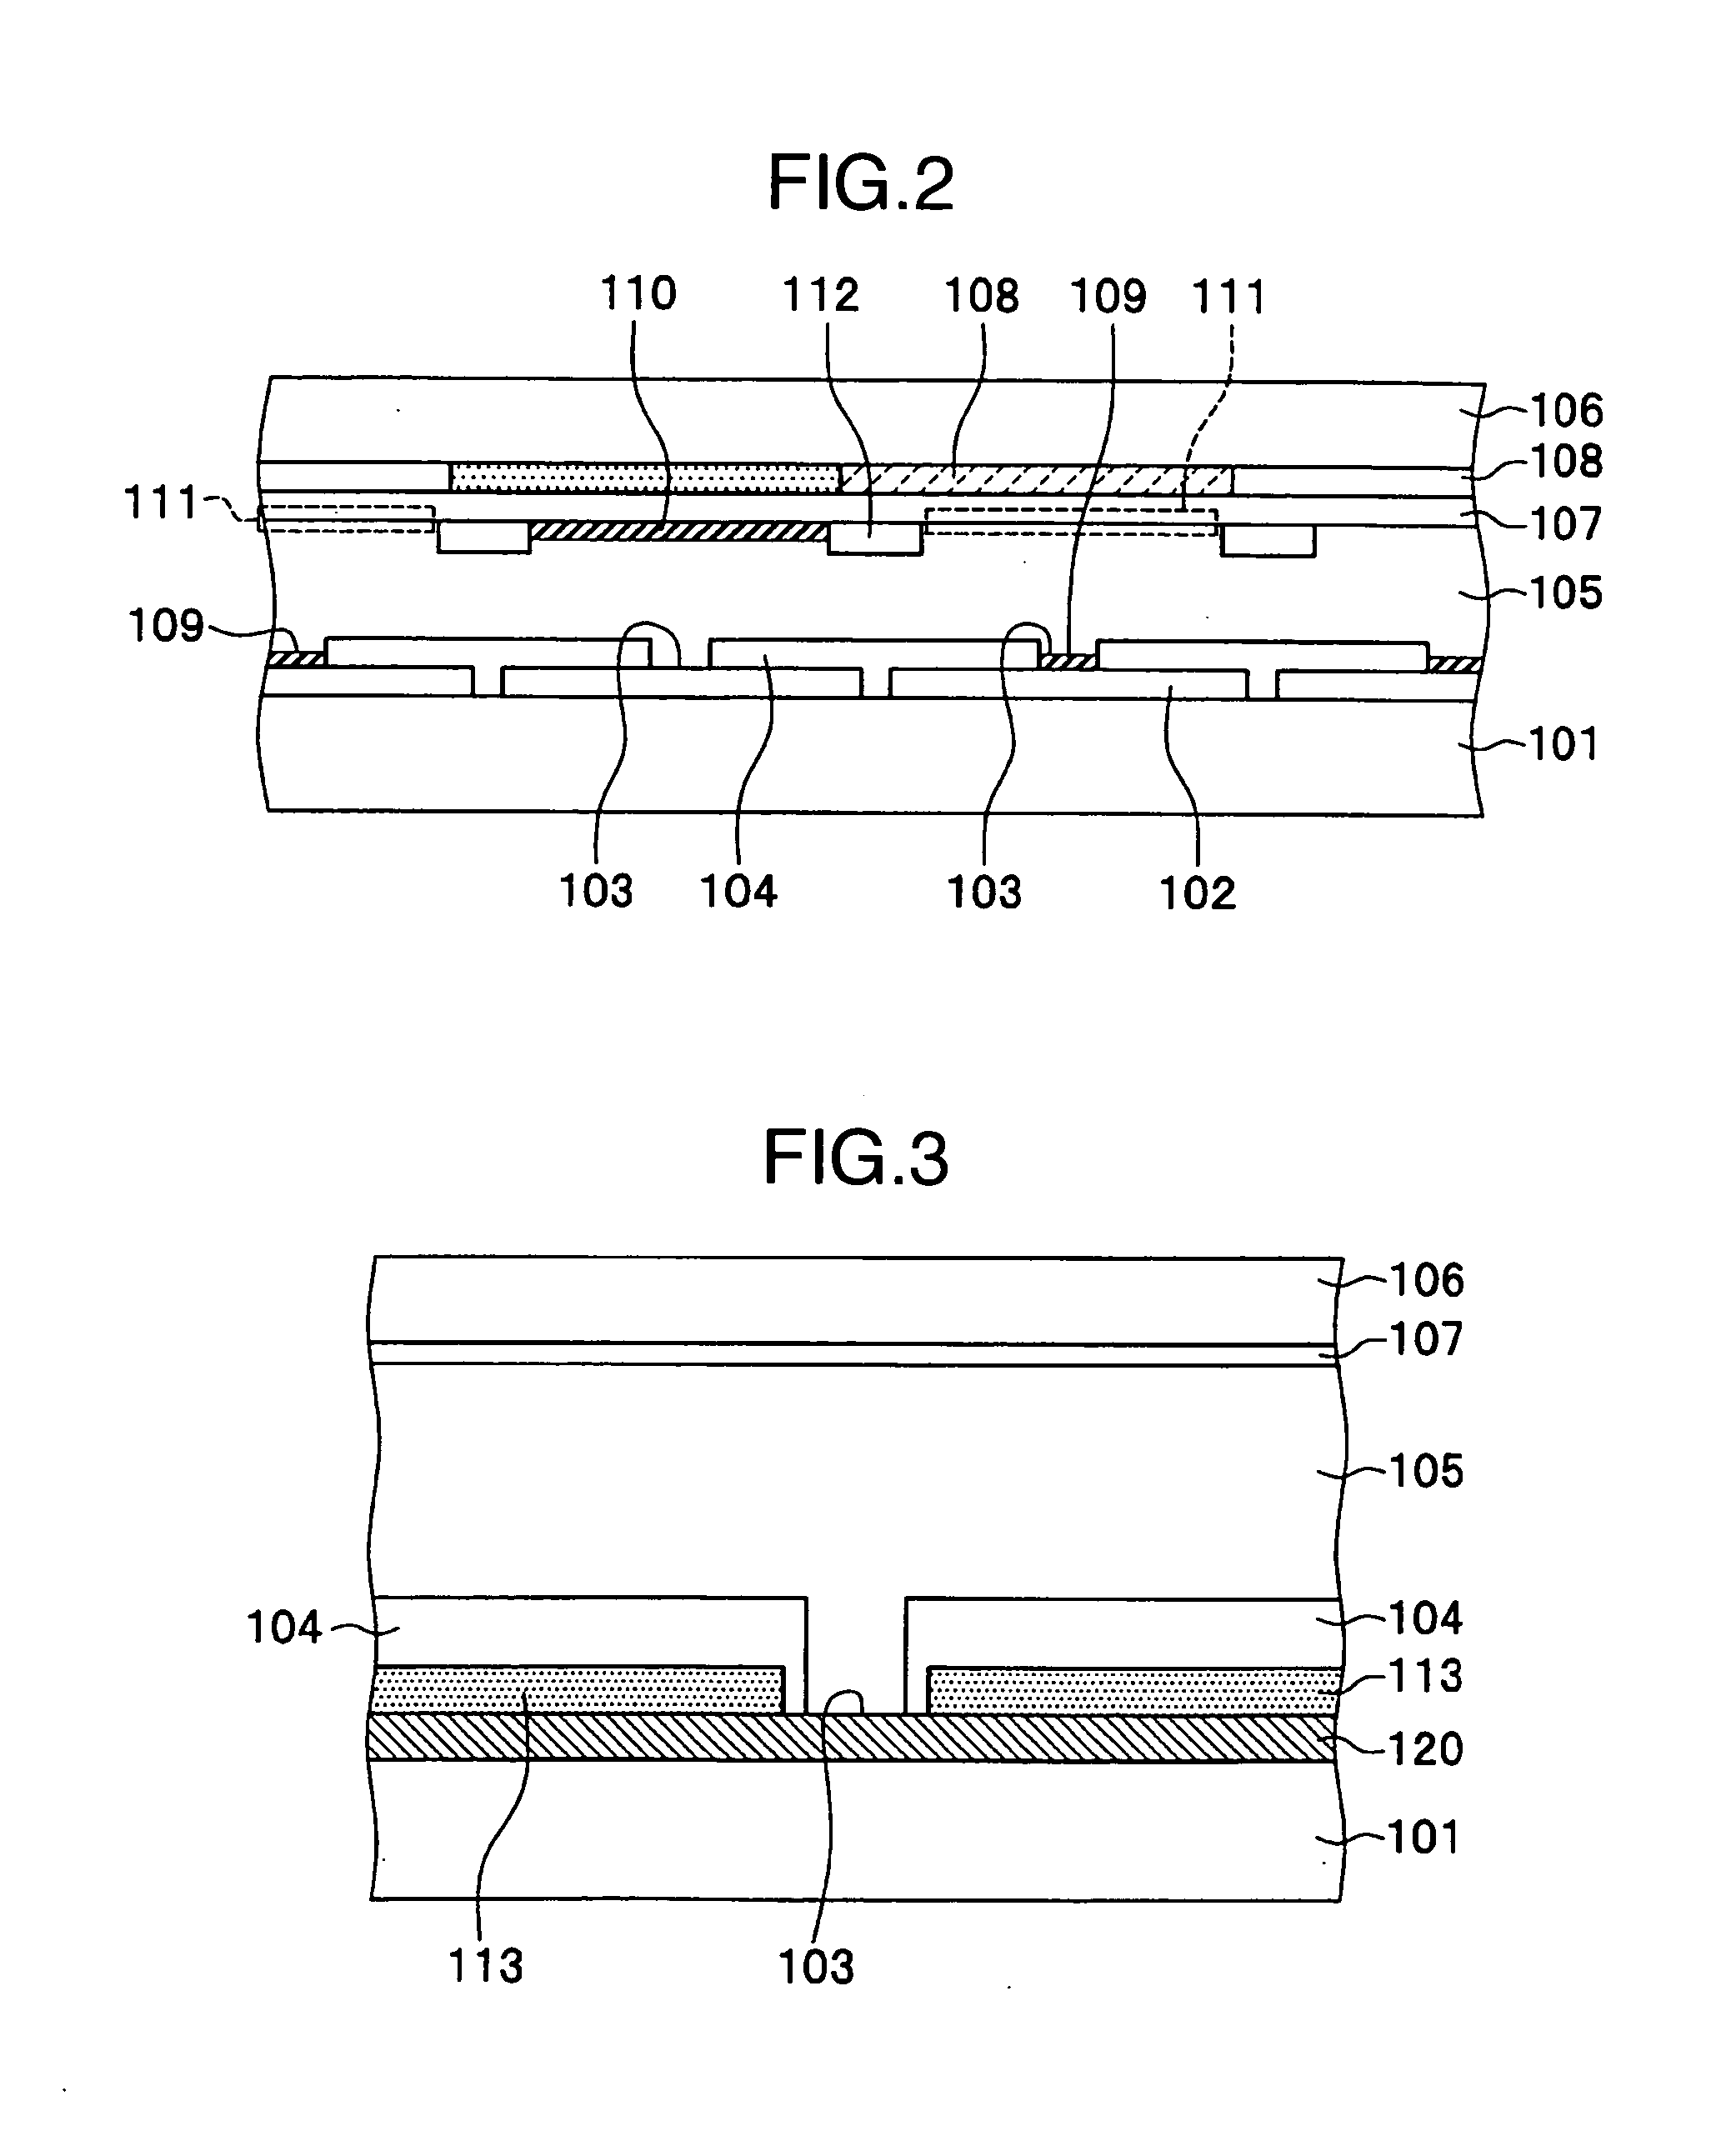 High-definition pixel structure of electrochromic displays and method of producing the same